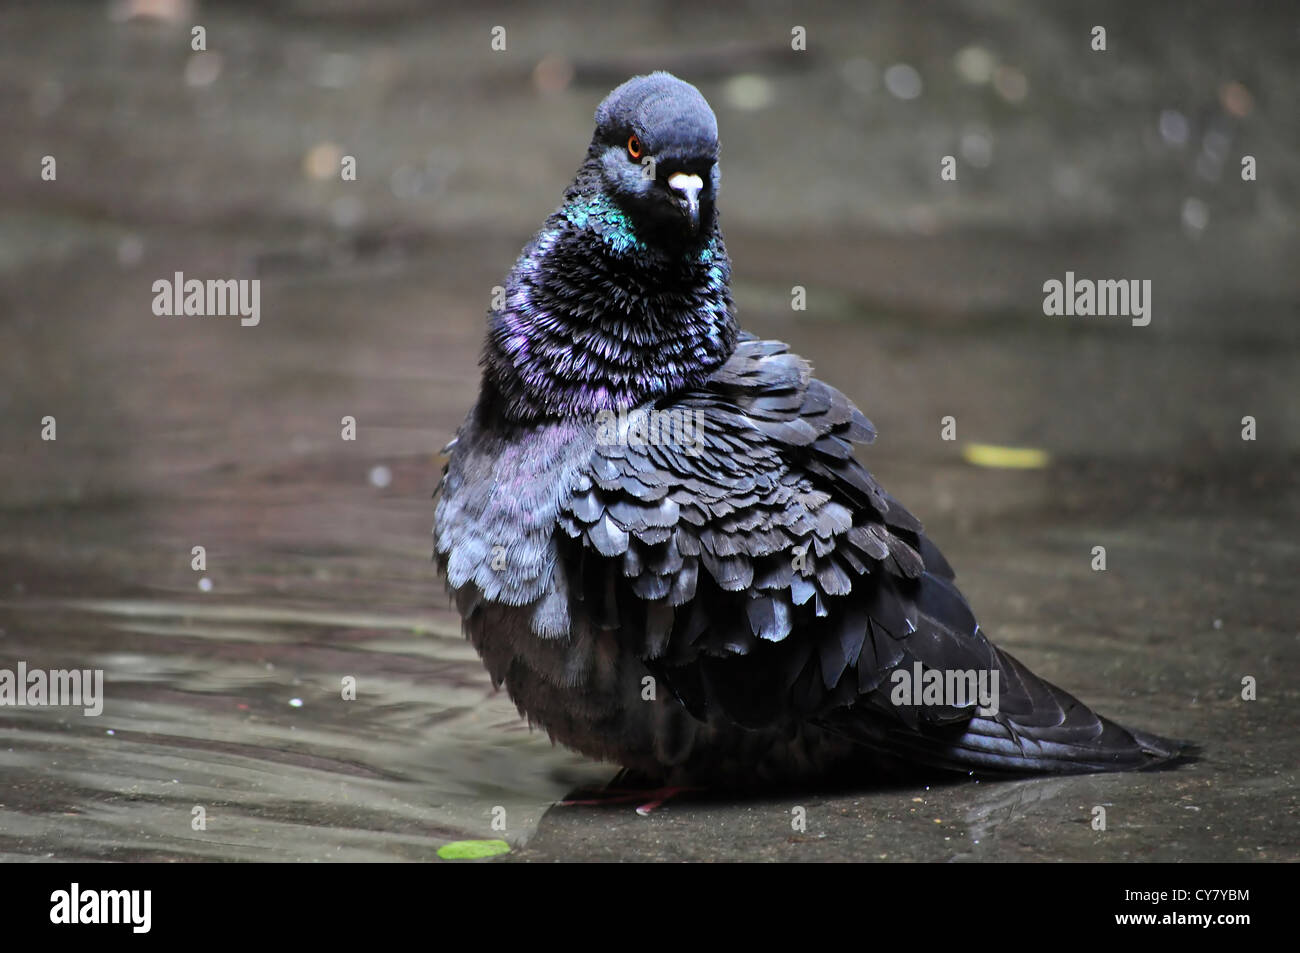 A Wet Pigeon after the Rain Stock Photo